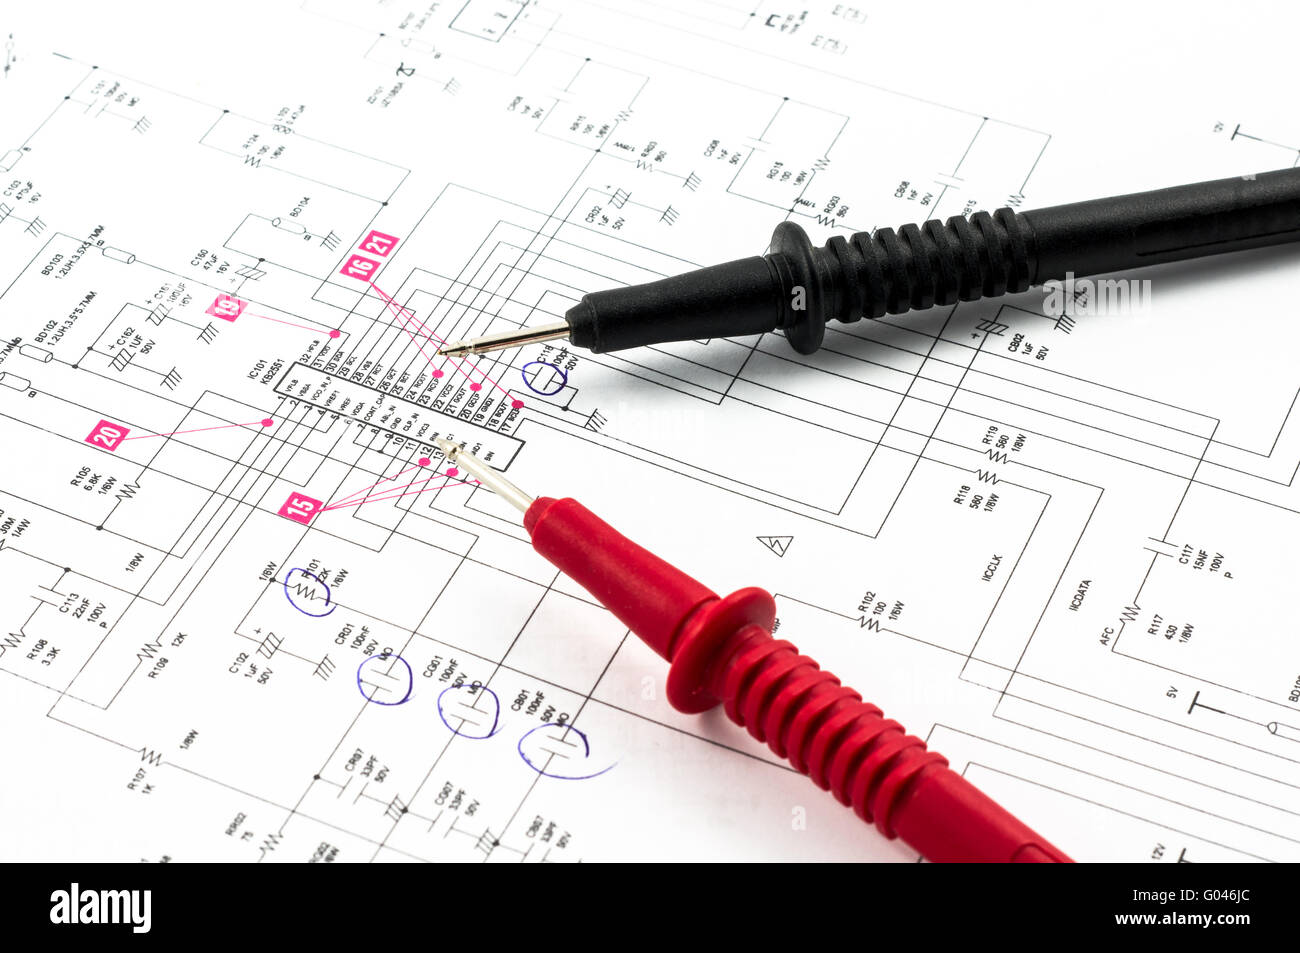 Electricity diagram (drawing or design) and pointed electrical test probes Stock Photo